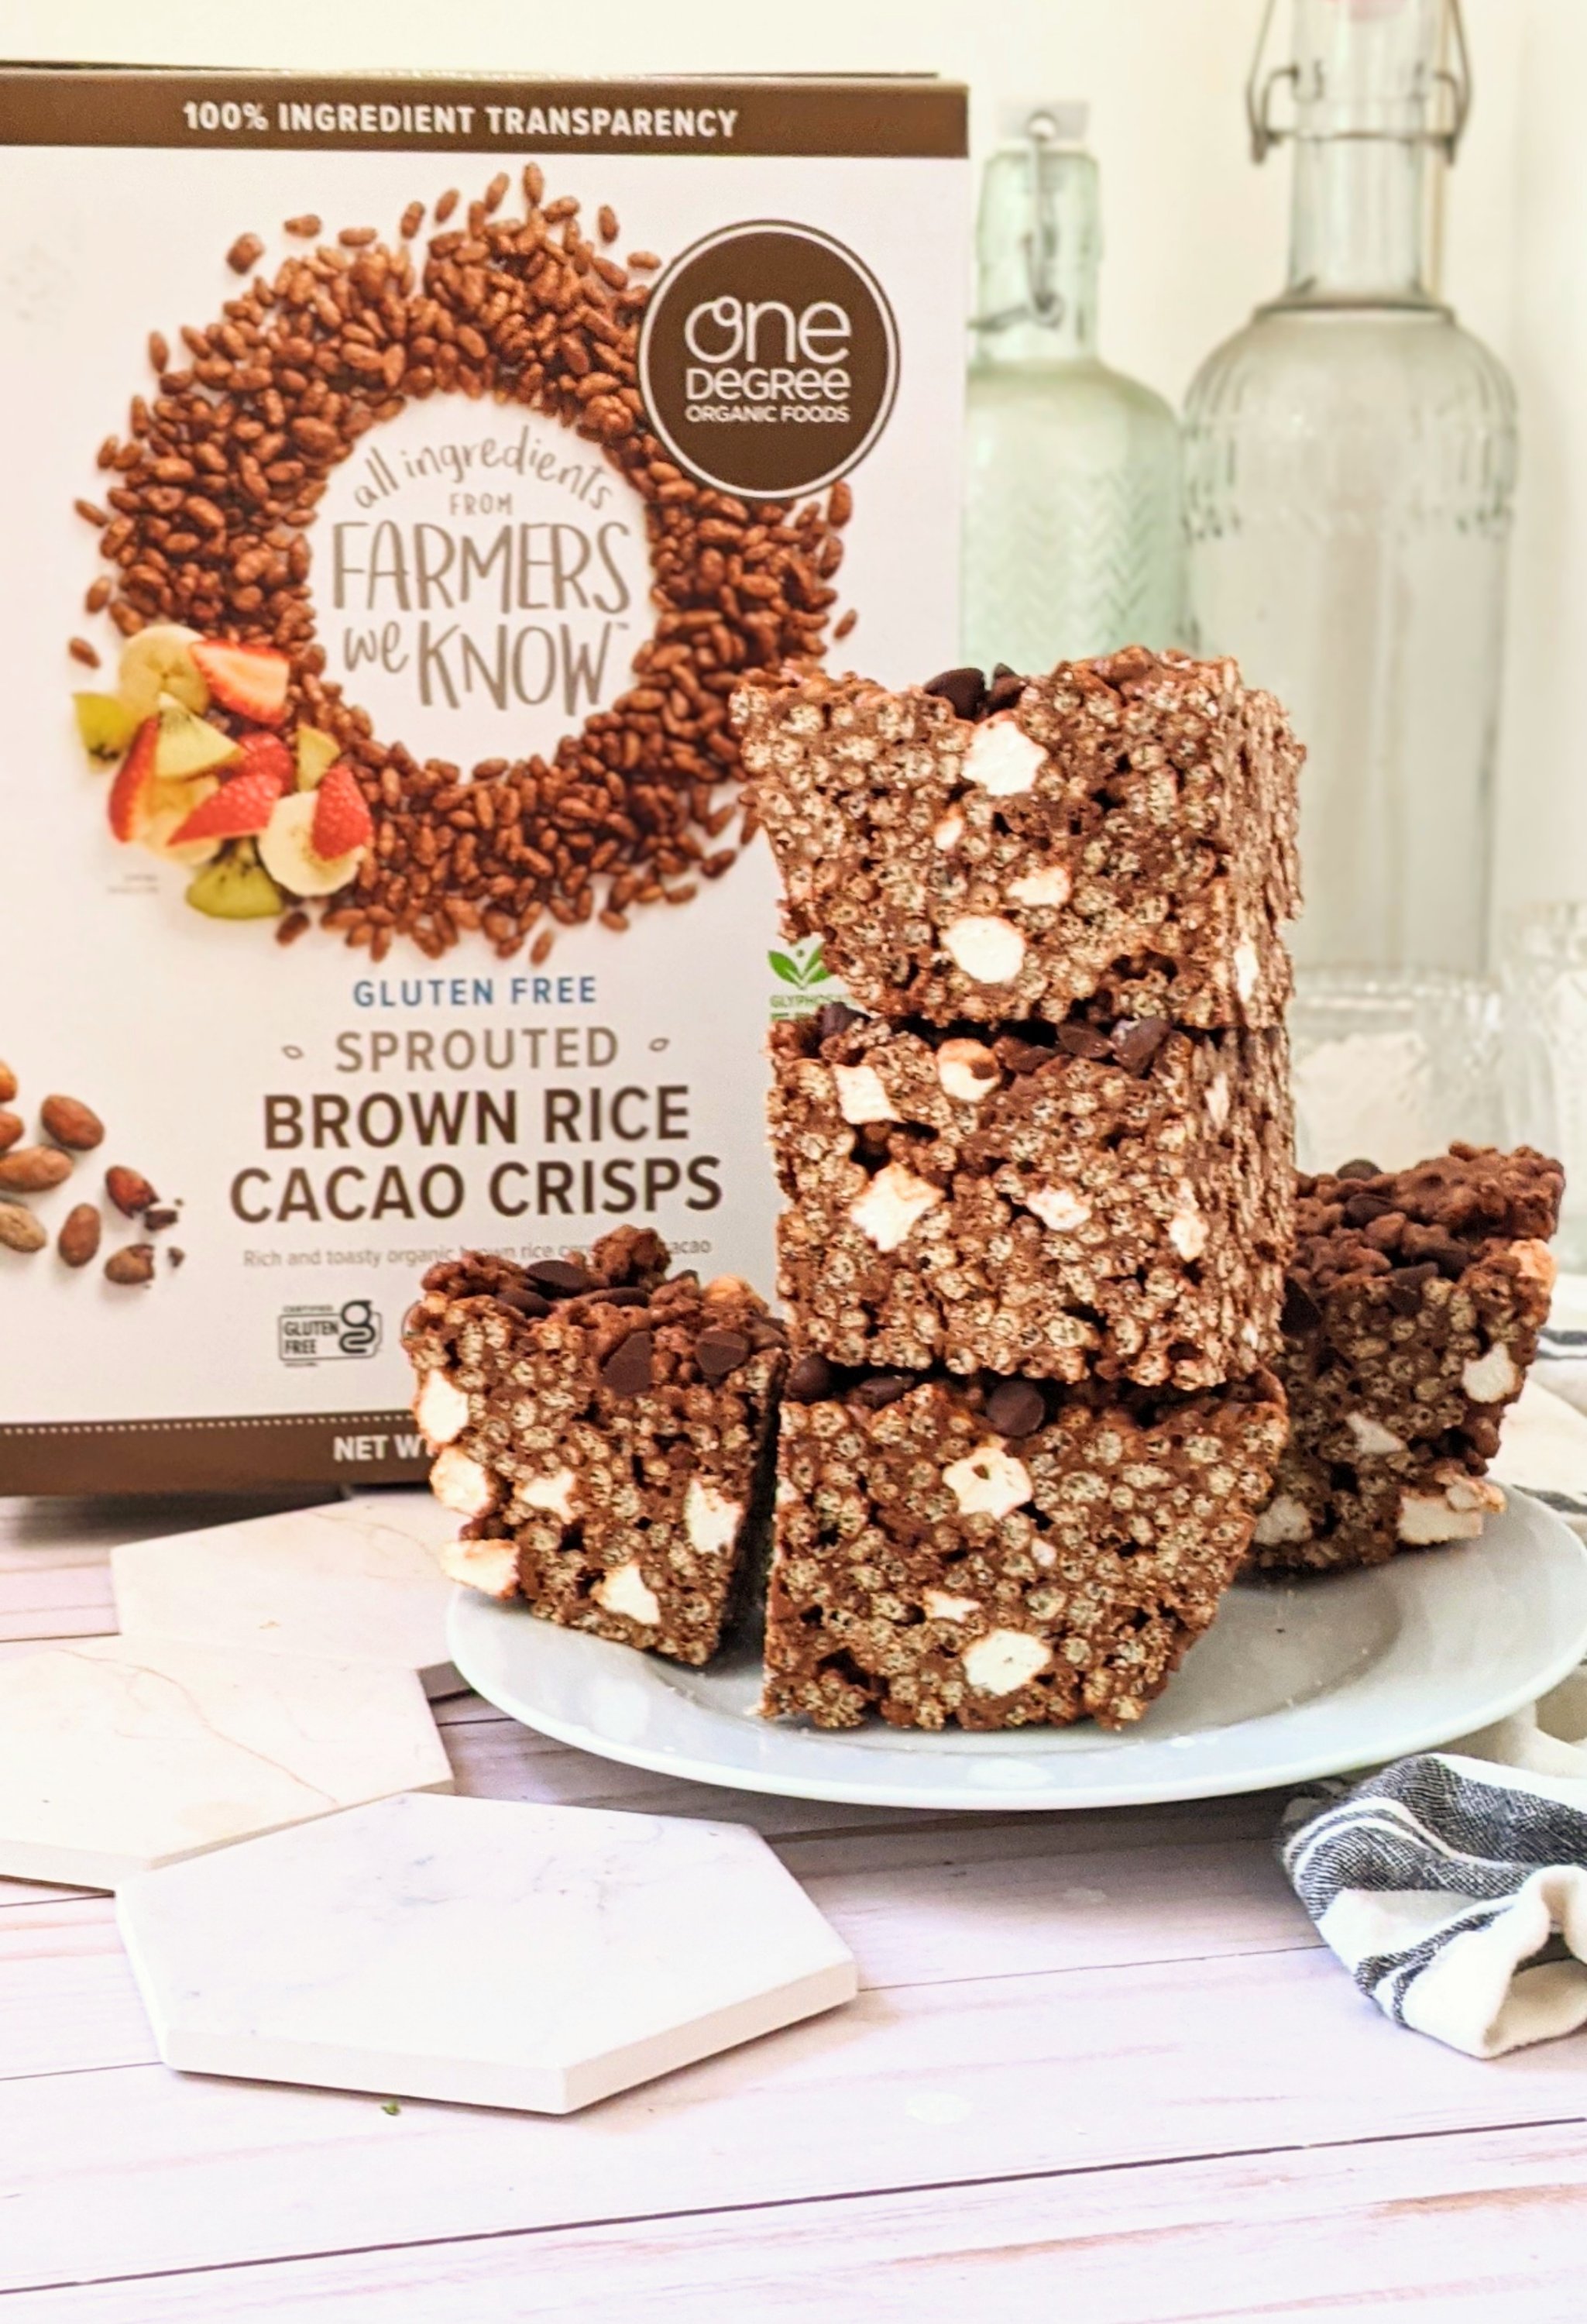 one degree organics brown rice cacao crisps cereal recipes healthy chocolate cereal bars vegan chocolate rice krispie treats recipe with coconut oil